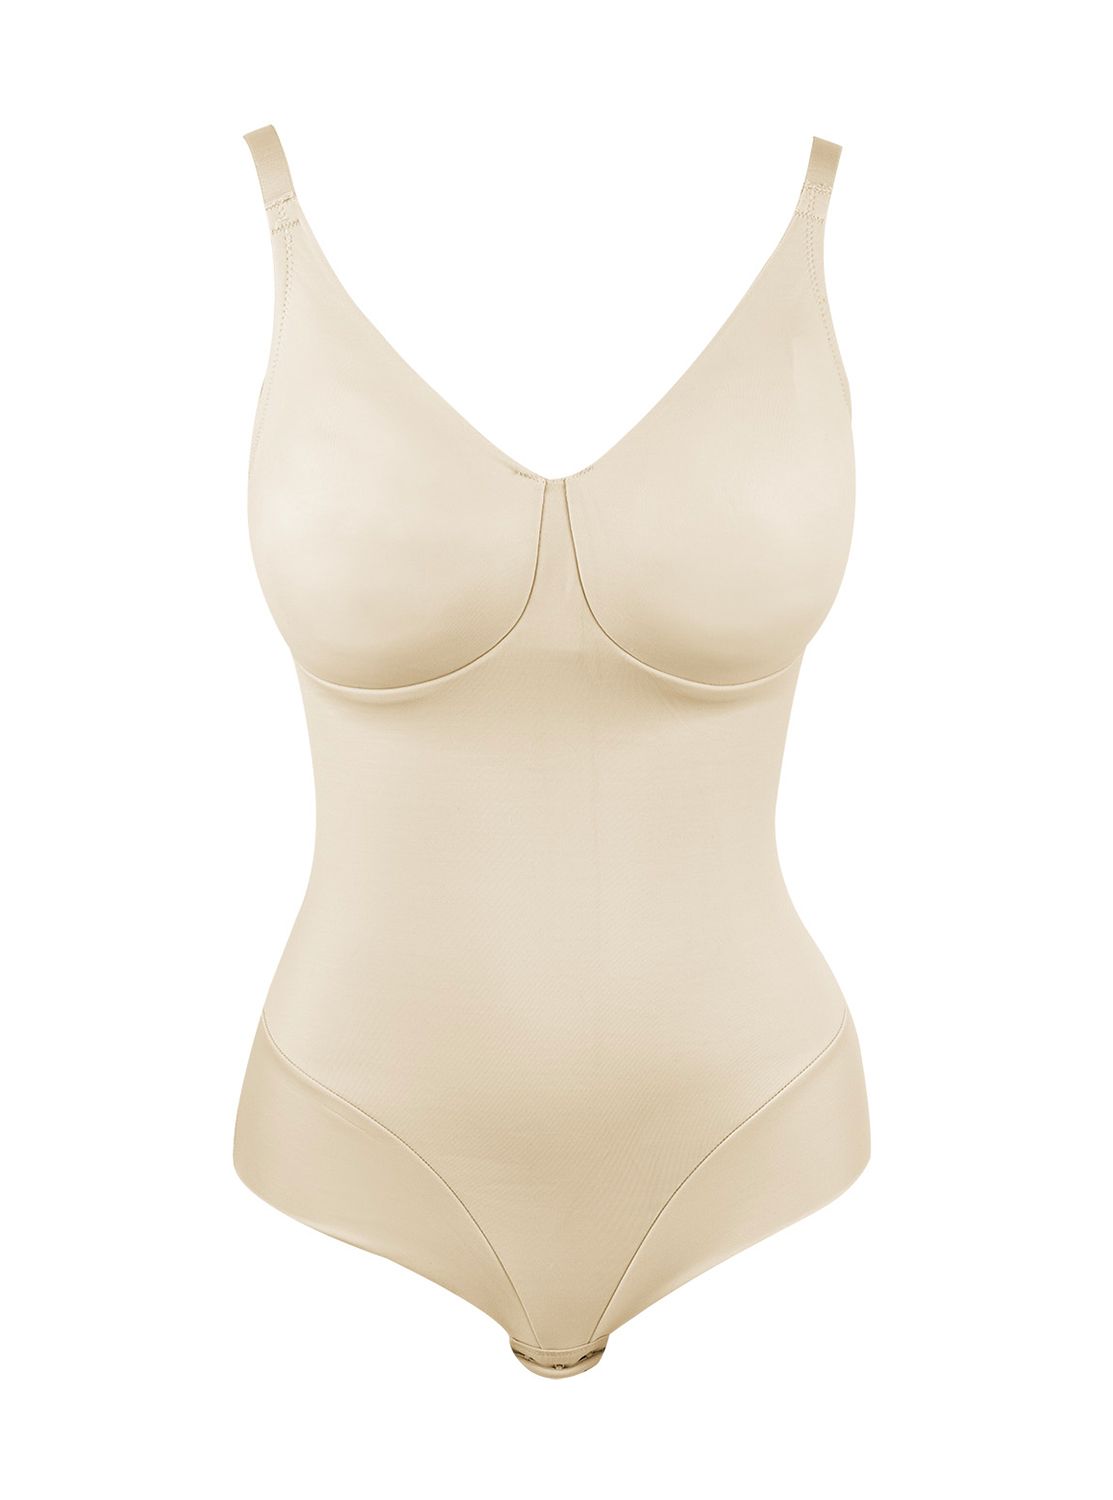 https://www.miraclesuitfrance.fr/9631-thickbox_default/body-gainant-nude-2802-1-comfort-leg.jpg